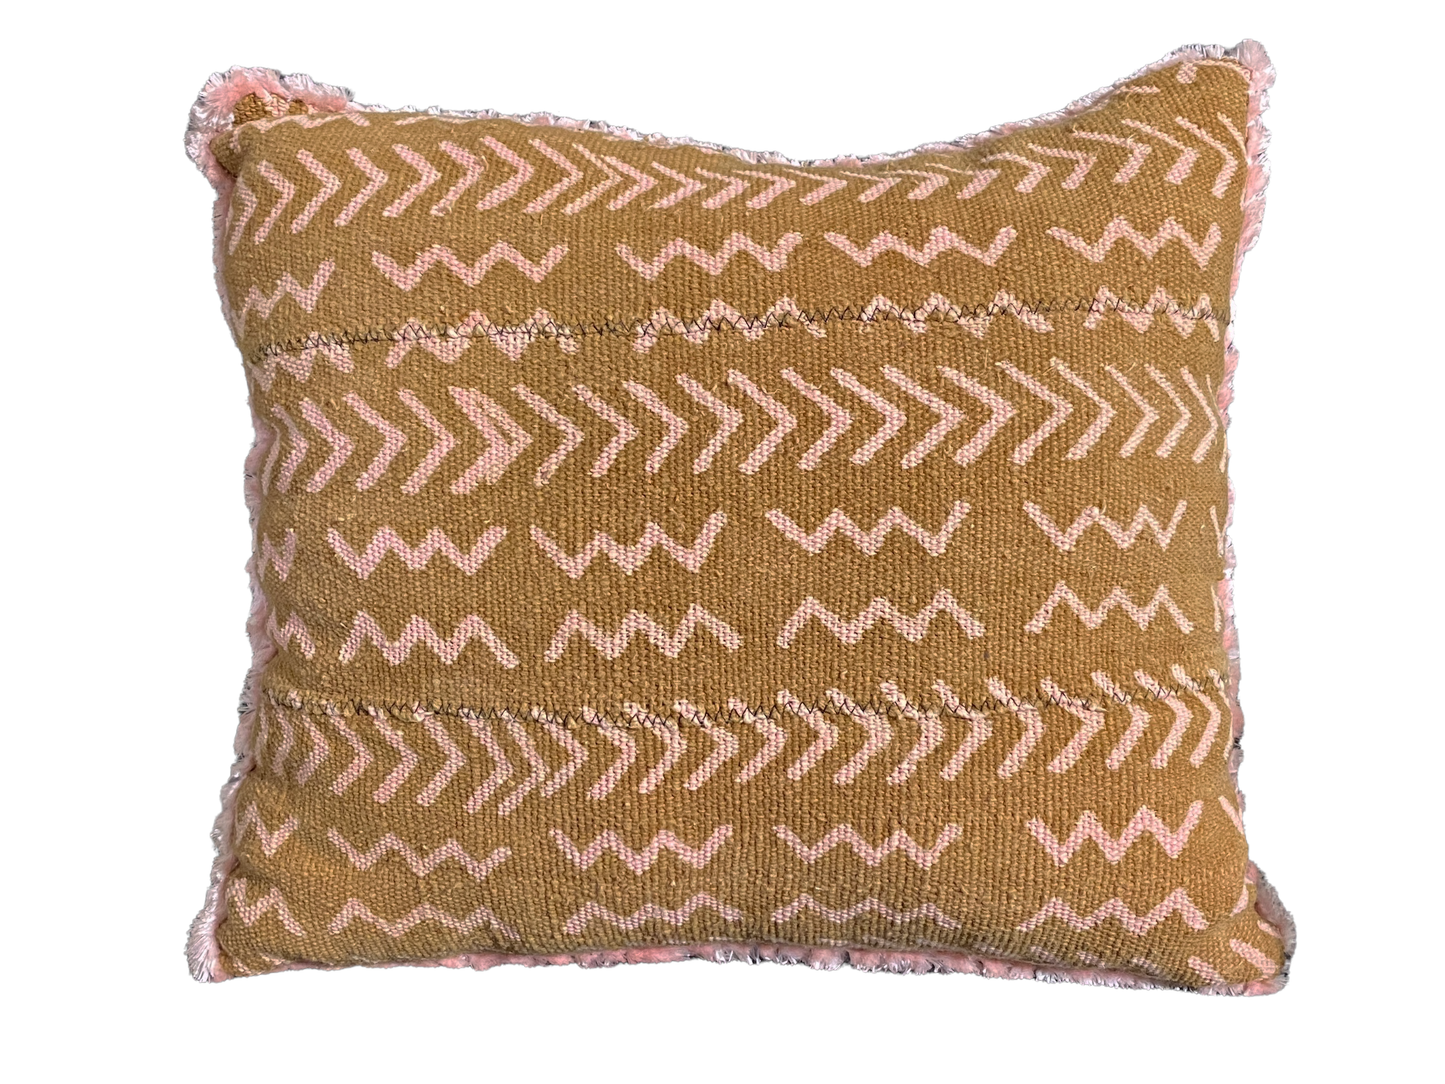 #4806 Contemporary Brown & Pink Pillow Made from Vintage Bogolan African Mali Mud Cloth